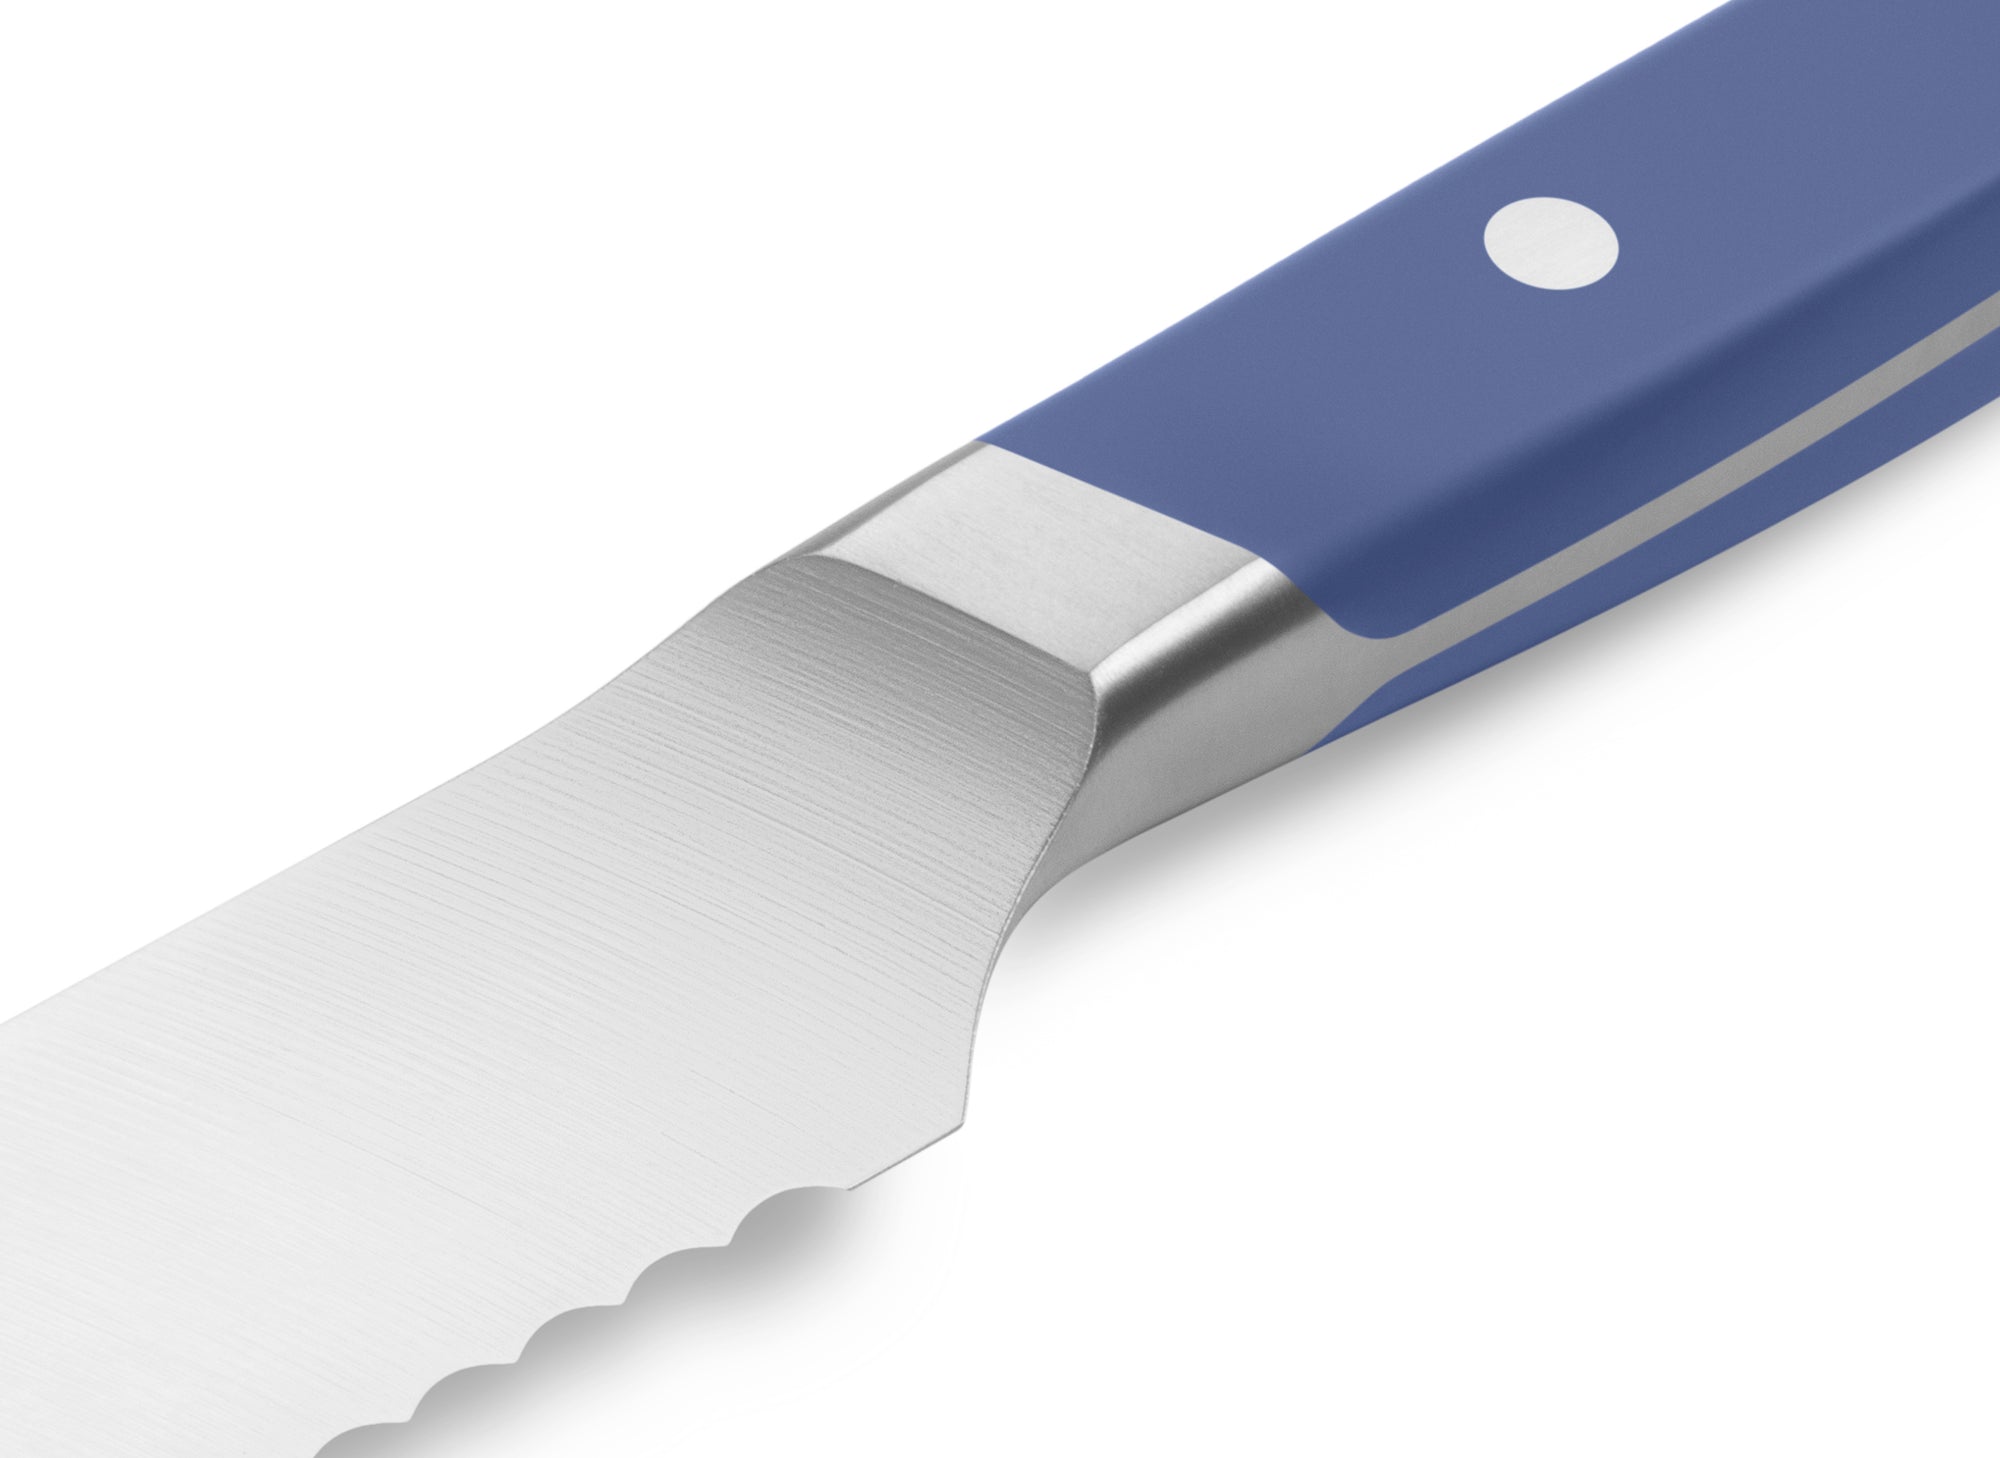 The Misen Serrated Knife in blue features a unique sloped bolster.